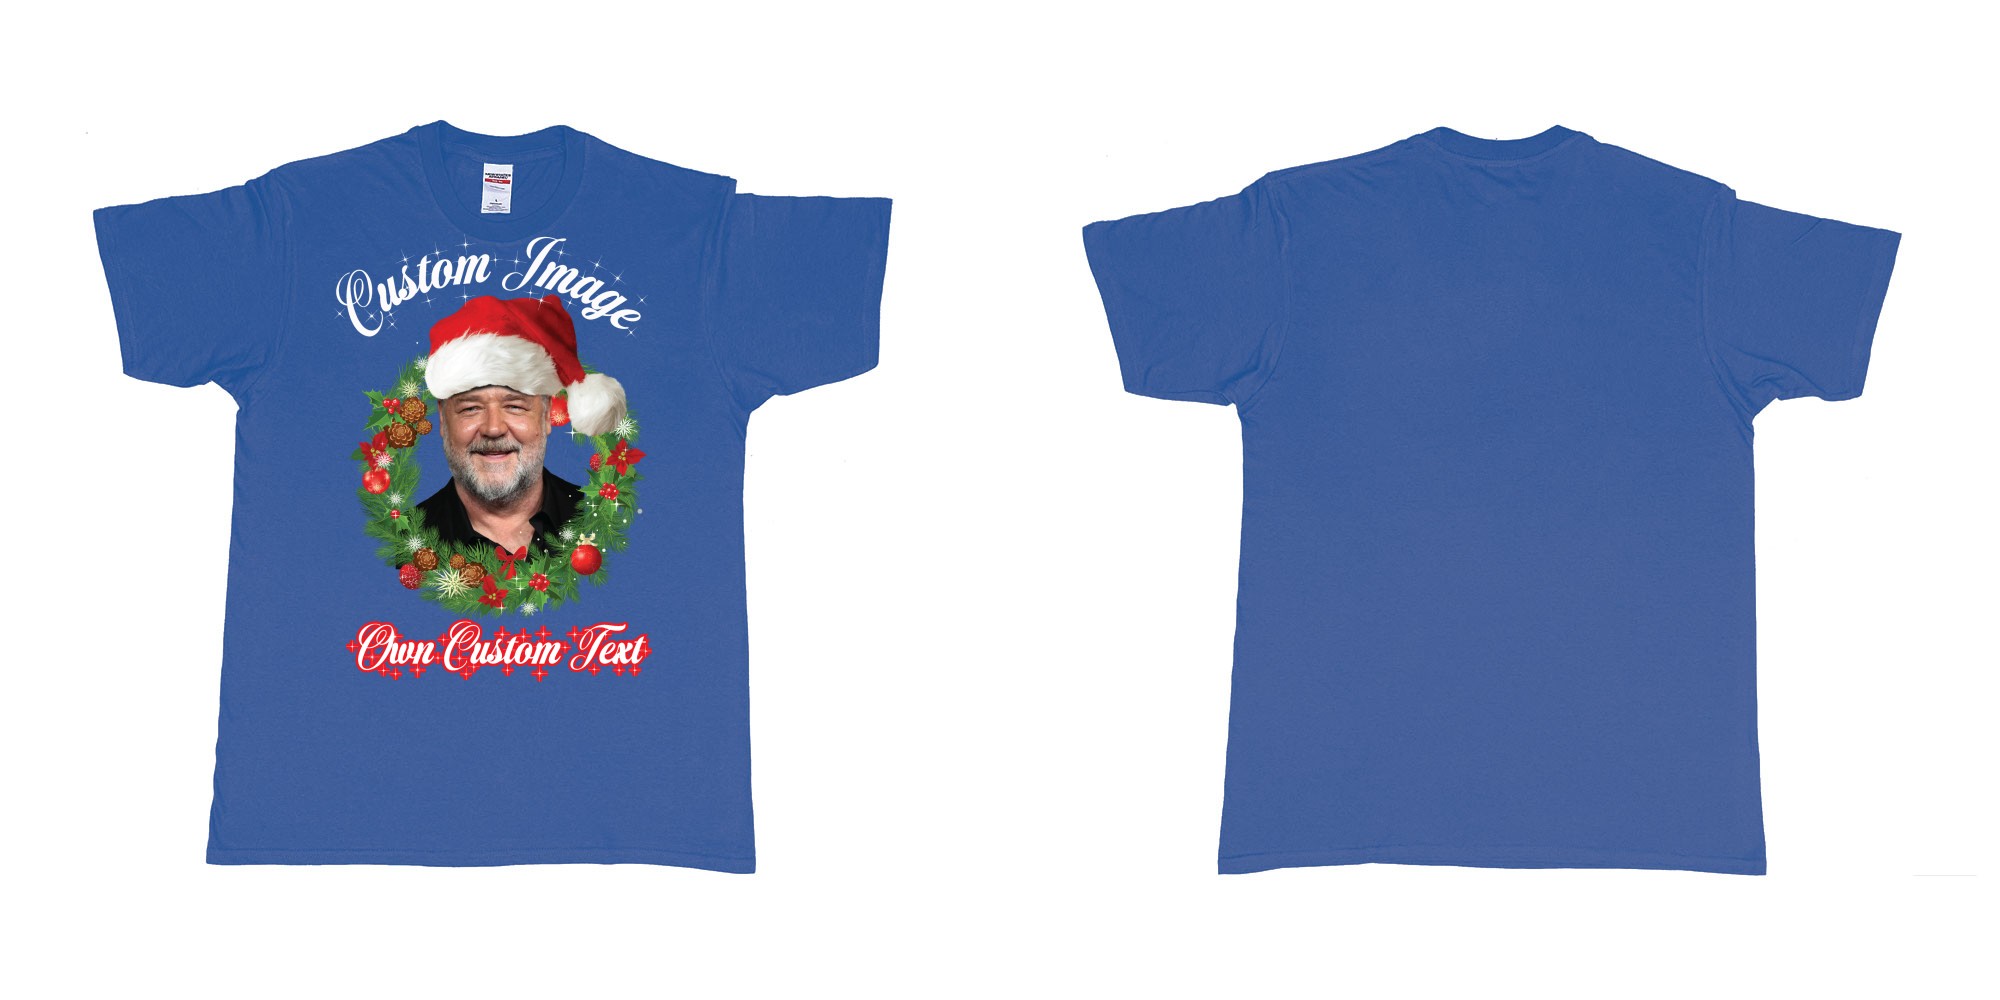 Custom tshirt design christmas wreath custom face image text in fabric color royal-blue choice your own text made in Bali by The Pirate Way